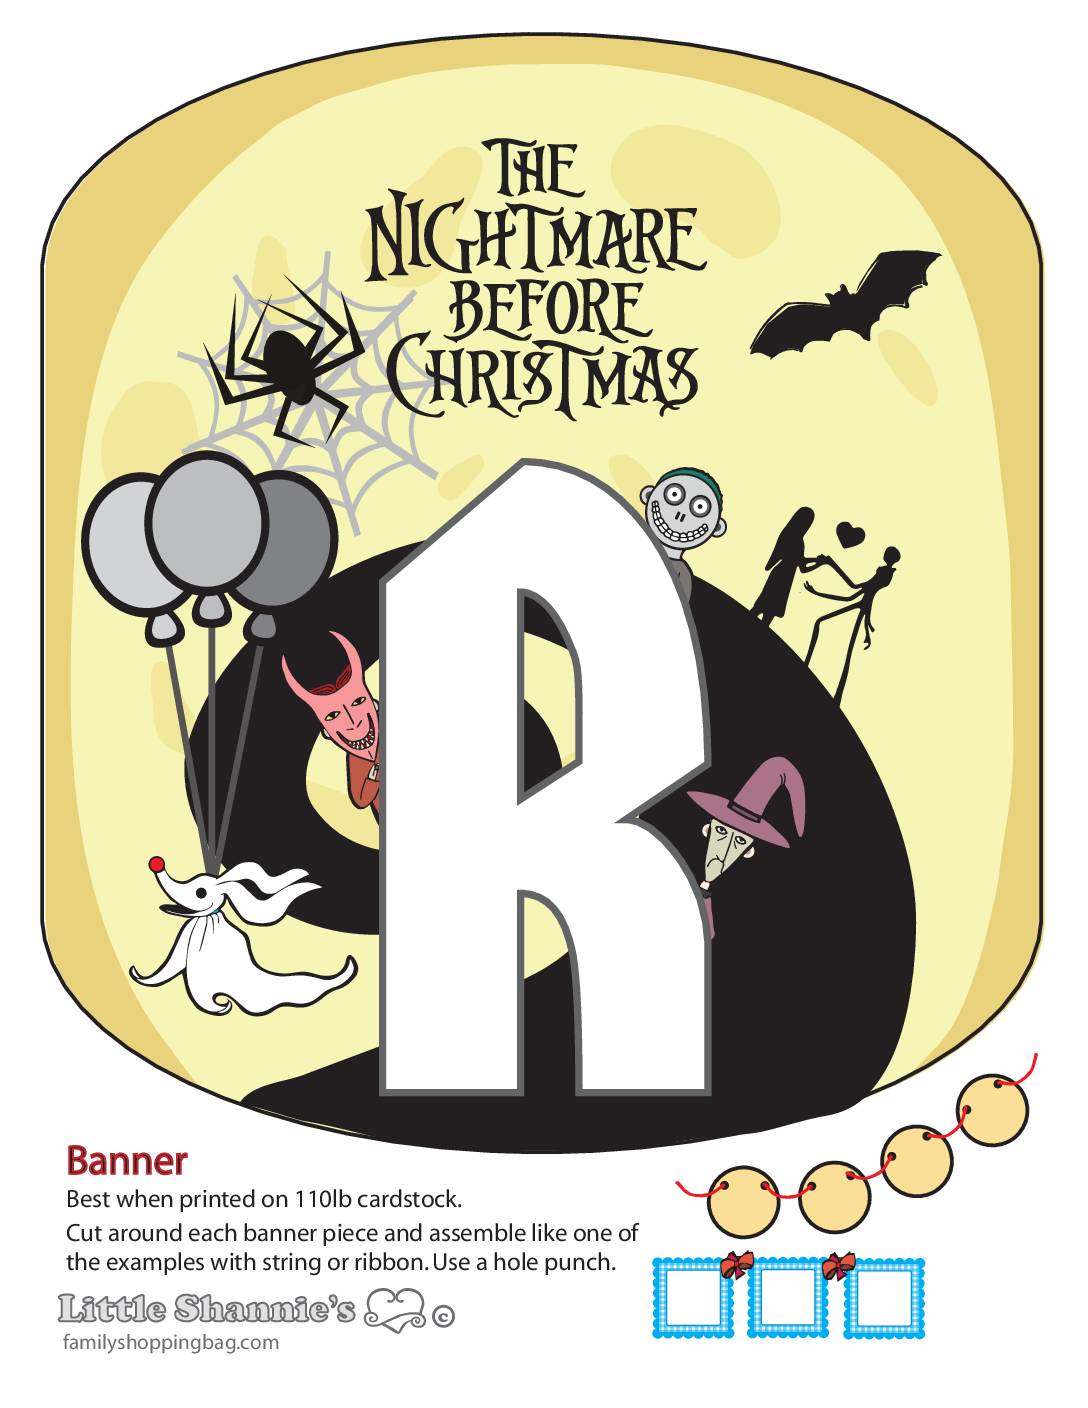 Banner R Nightmare BC Party Banners